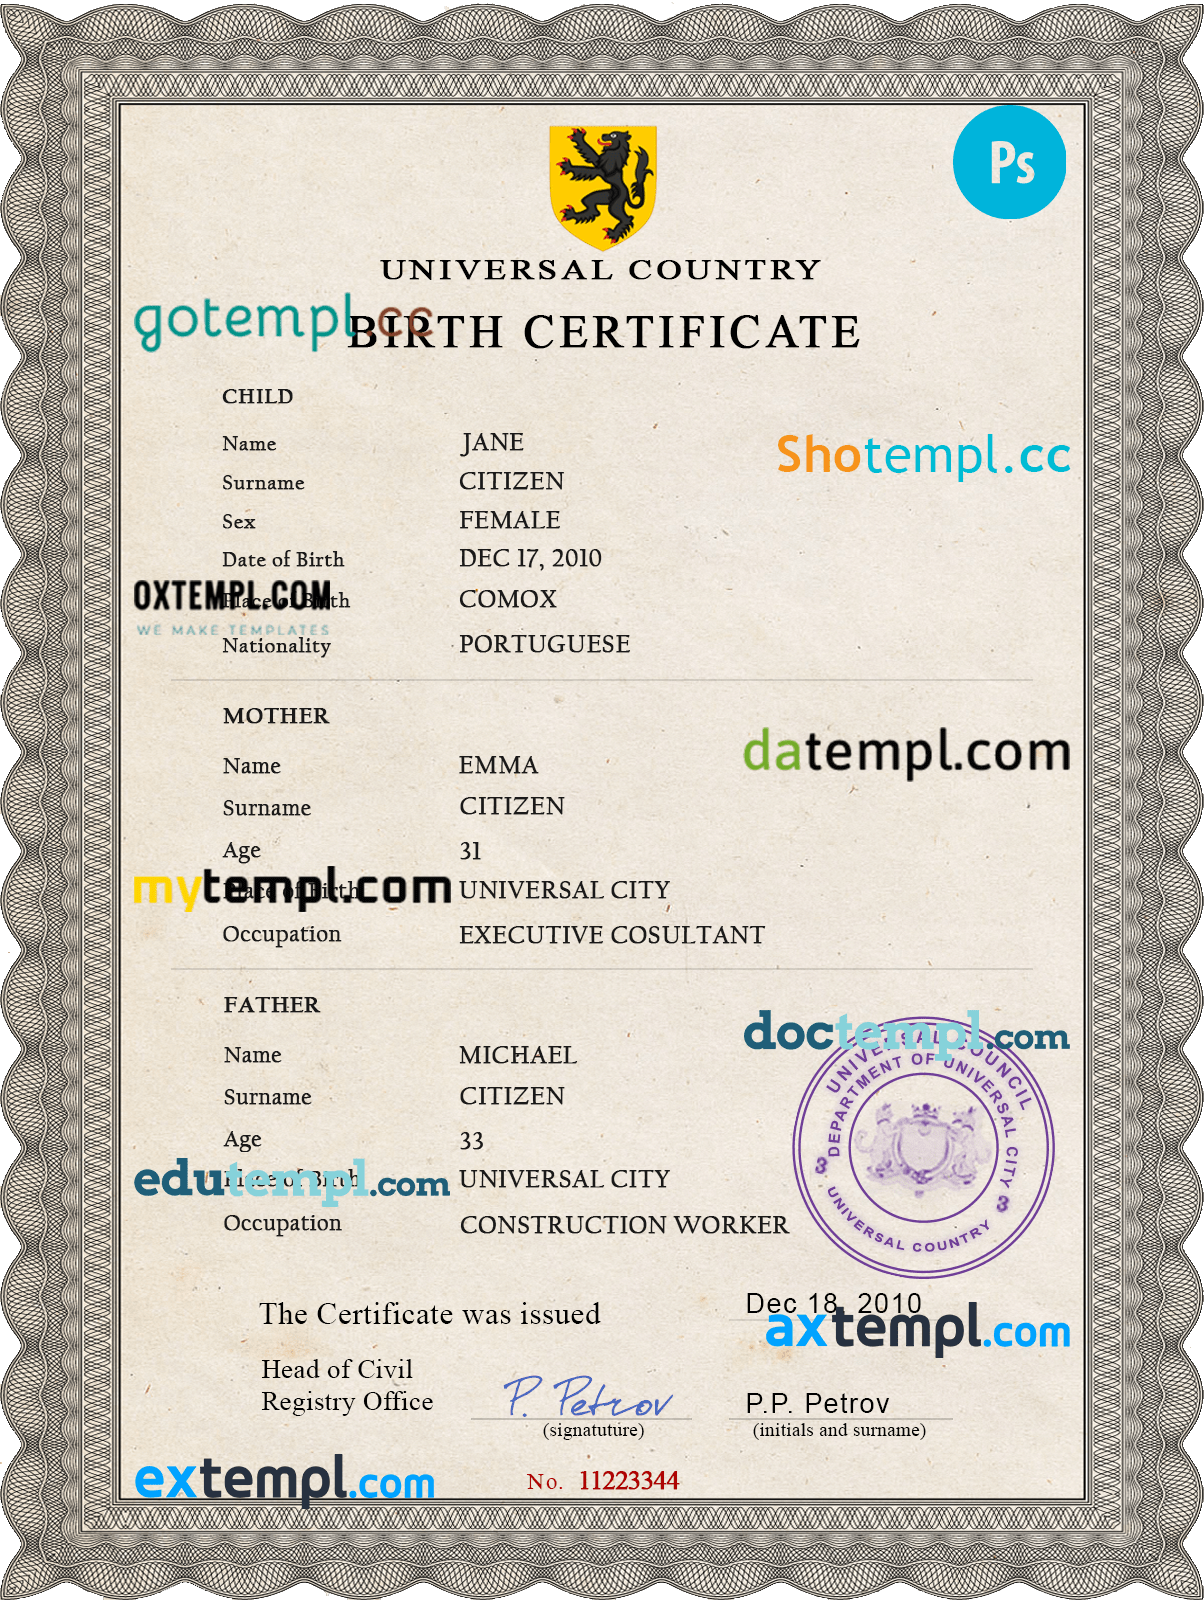 # limitless split universal birth certificate PSD template, fully editable